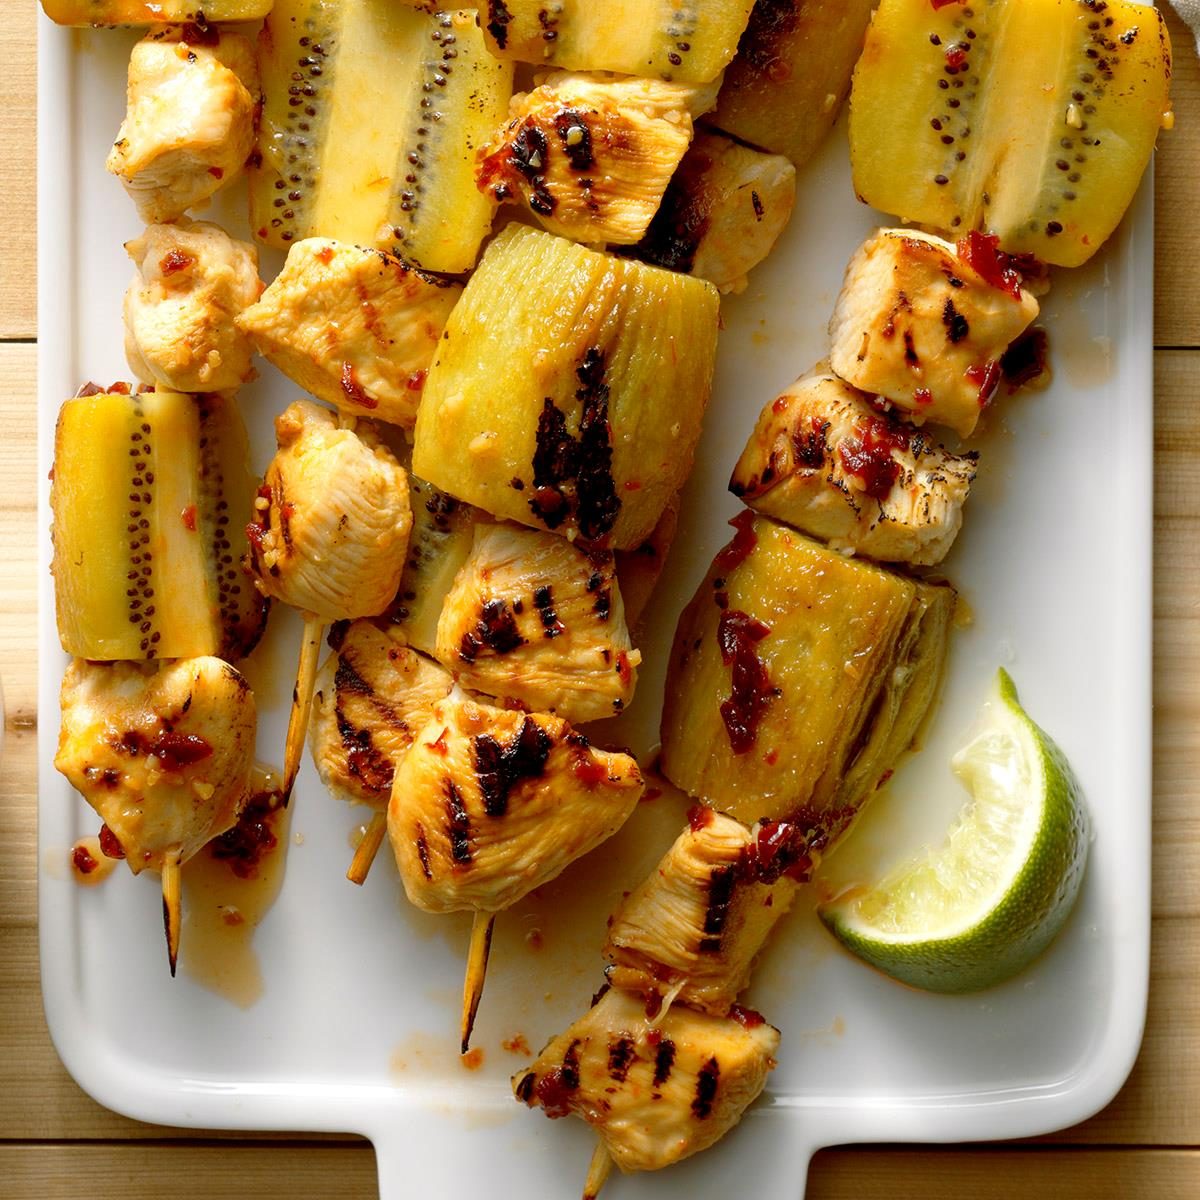 Easy Honey Chipotle BBQ Chicken Skewers Recipe Simply Organic Easy
Summer Entrées